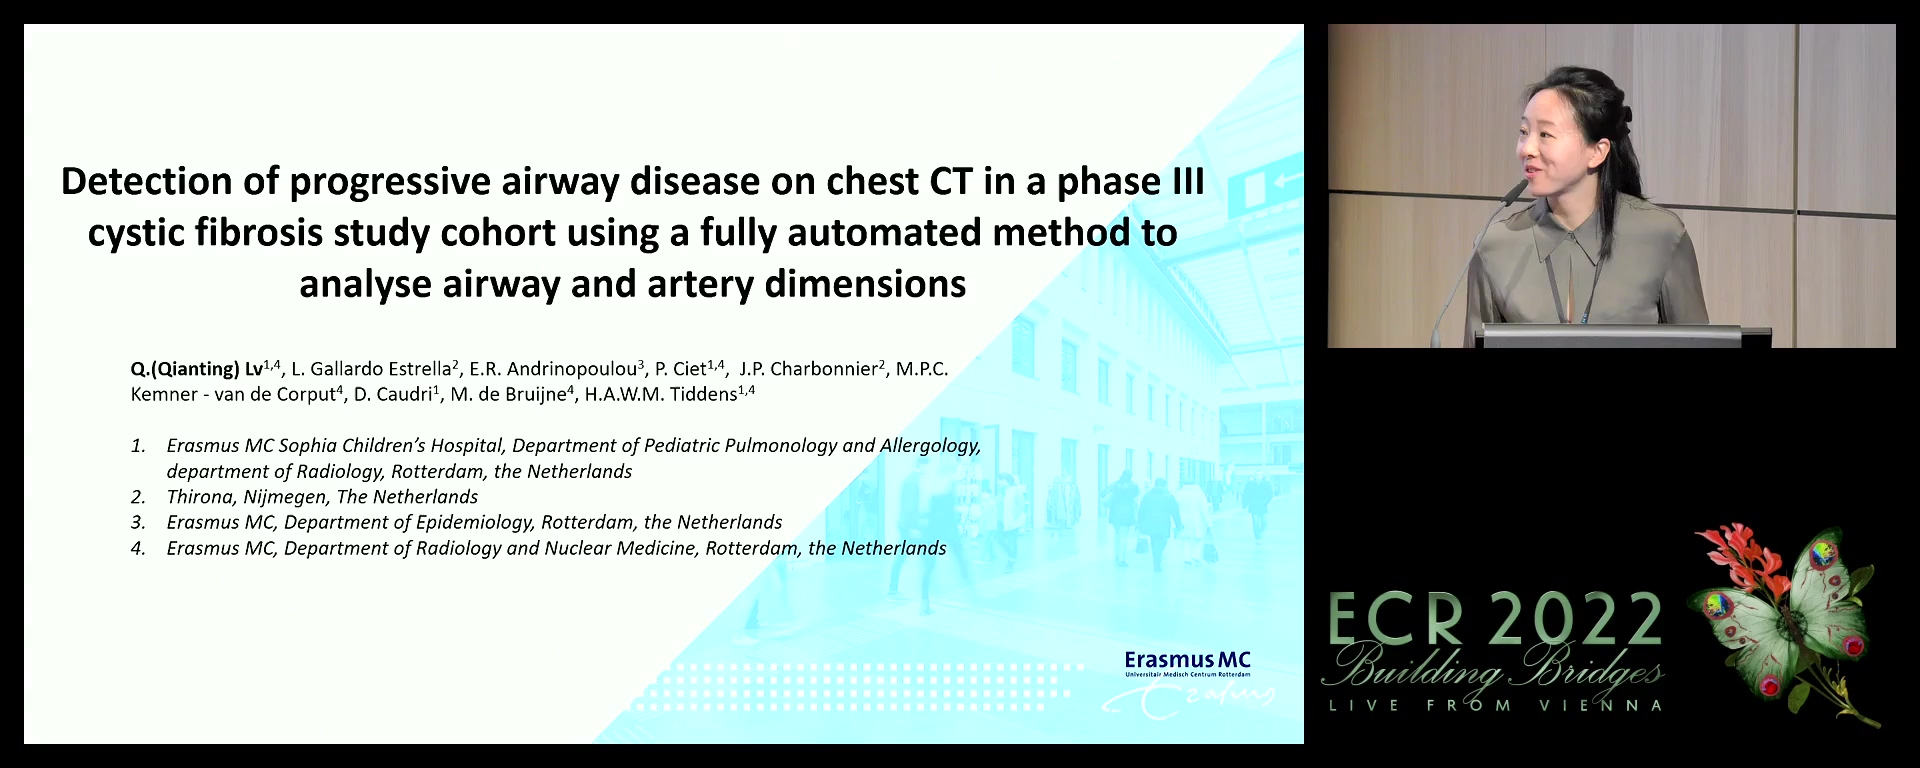 Detection of progressive airway disease on chest computed tomography in a phase III cystic fibrosis study cohort using a fully automated method to analyse airway and artery dimensions - Qianting Lv, Rotterdam / NL